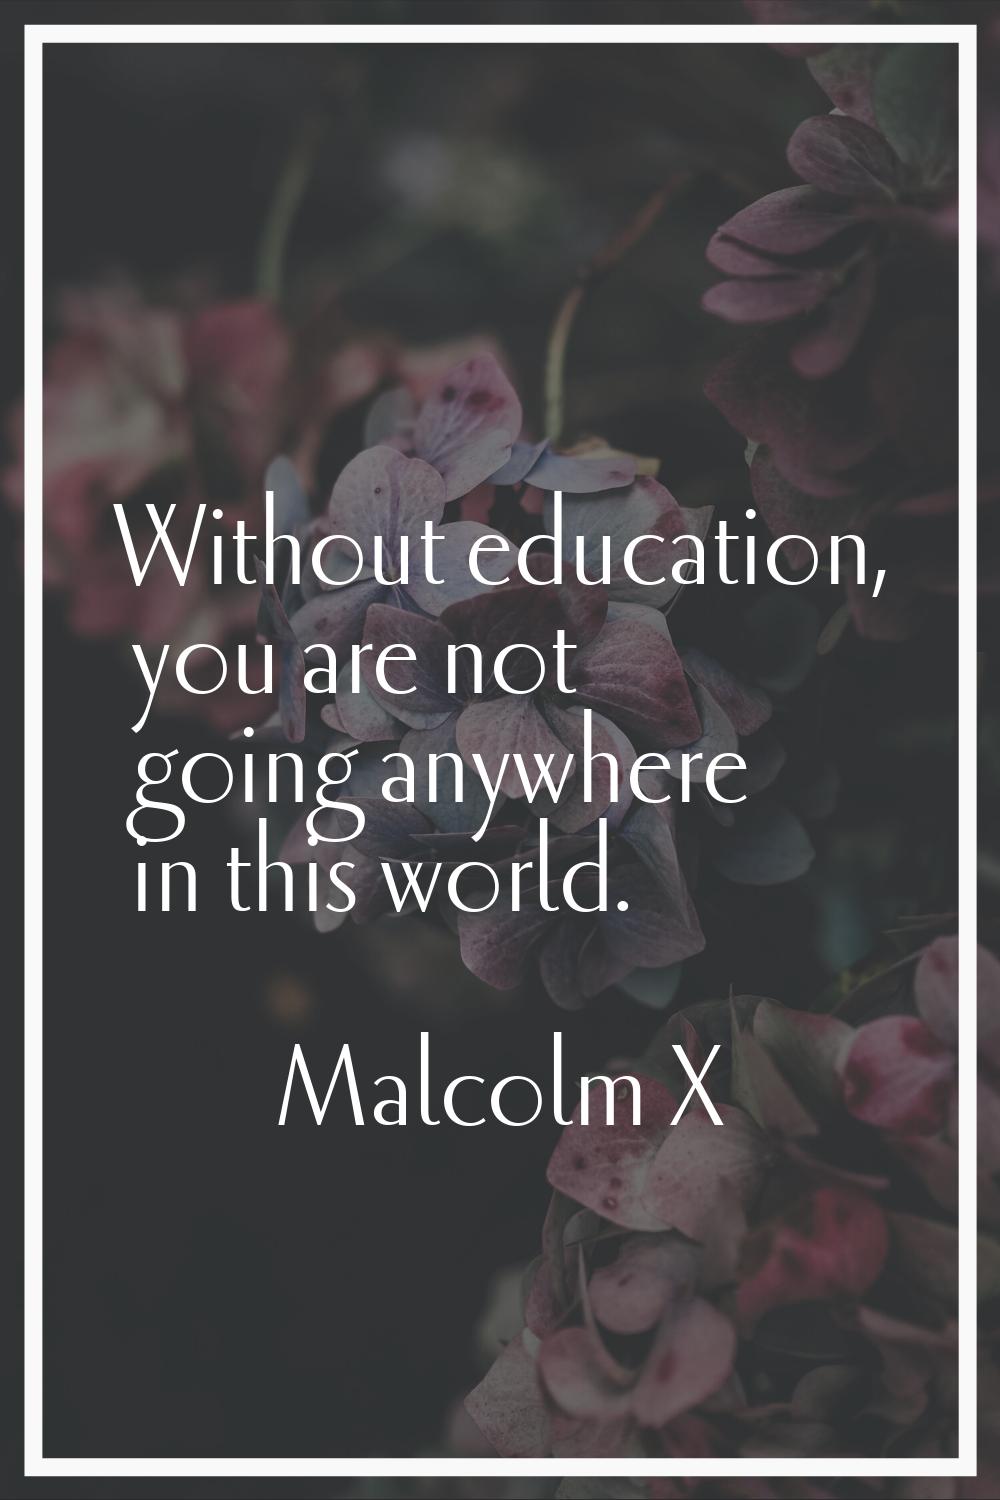 Without education, you are not going anywhere in this world.